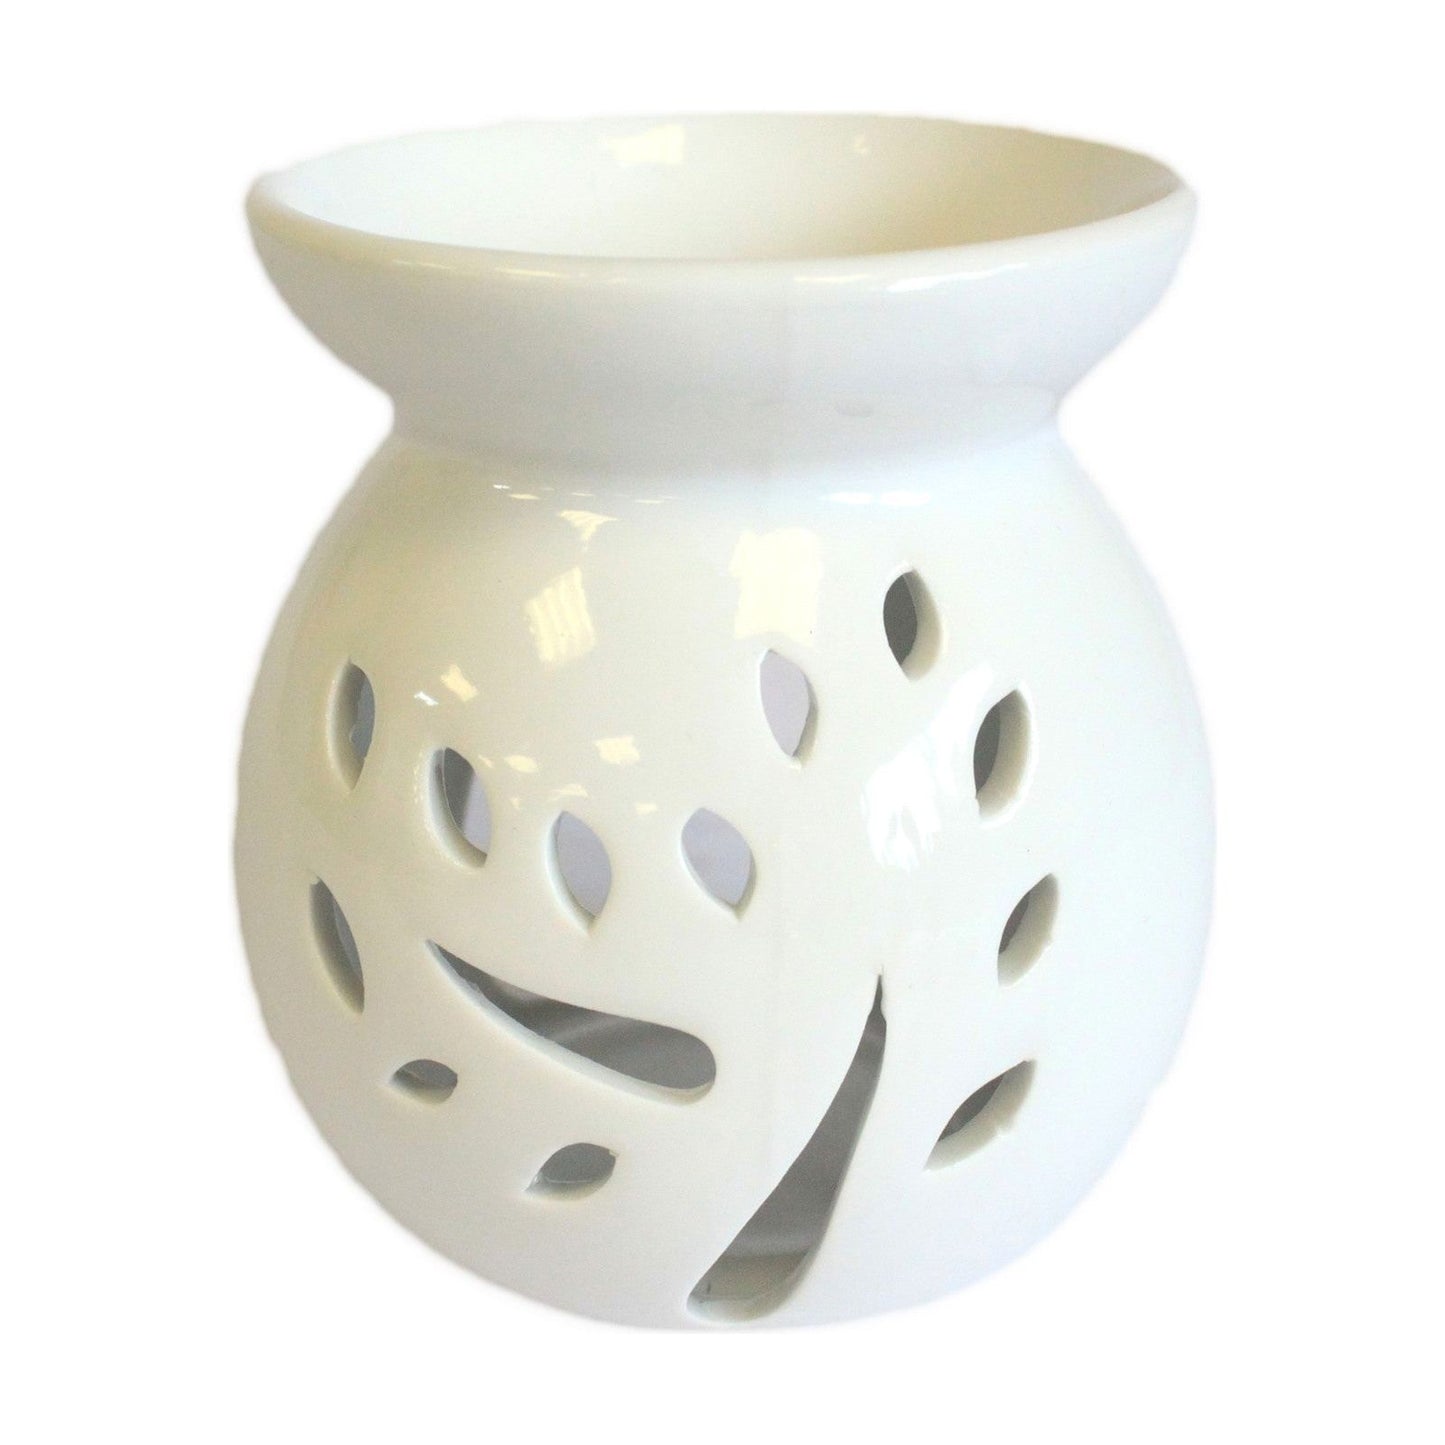 Lrg Classic White Oil Burner - Tree Cut-out - Ashton and Finch